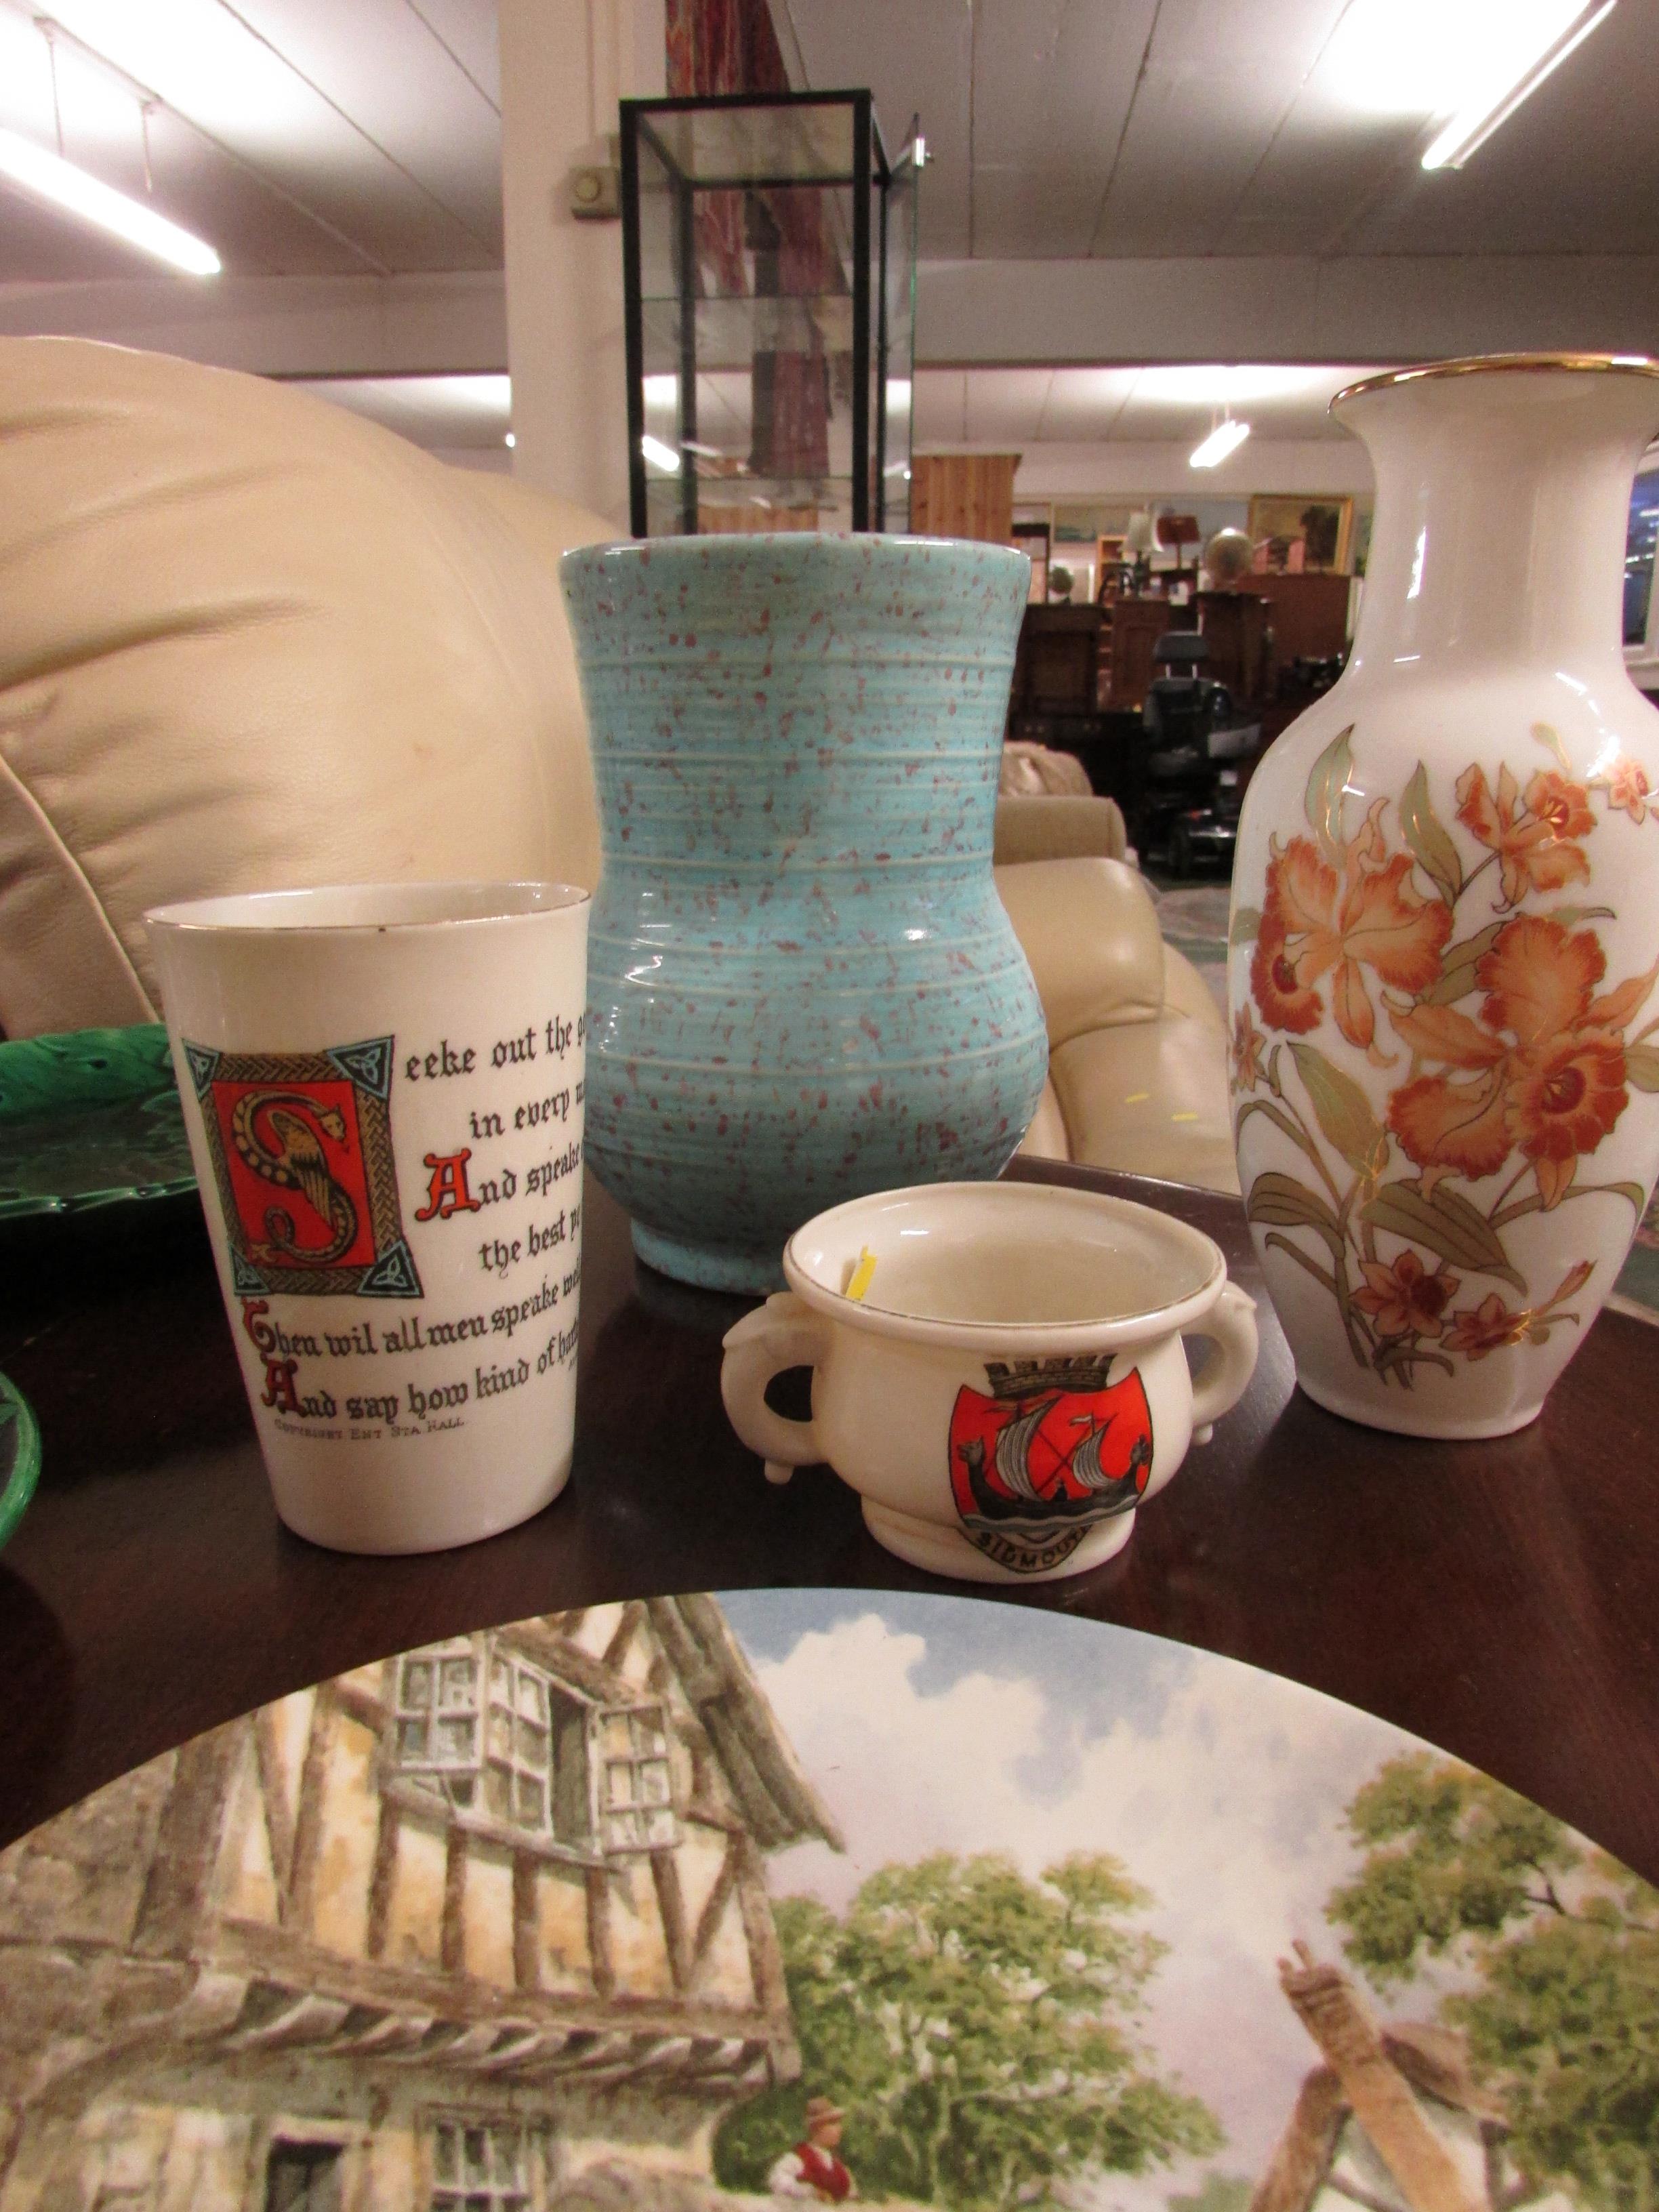 DECORATIVE CHINA INCLUDING LEAF DISH, GOSS MOTTO BEAKER, DUCAL VASE, PIN DISHES AND OTHER ITEMS - Image 2 of 2